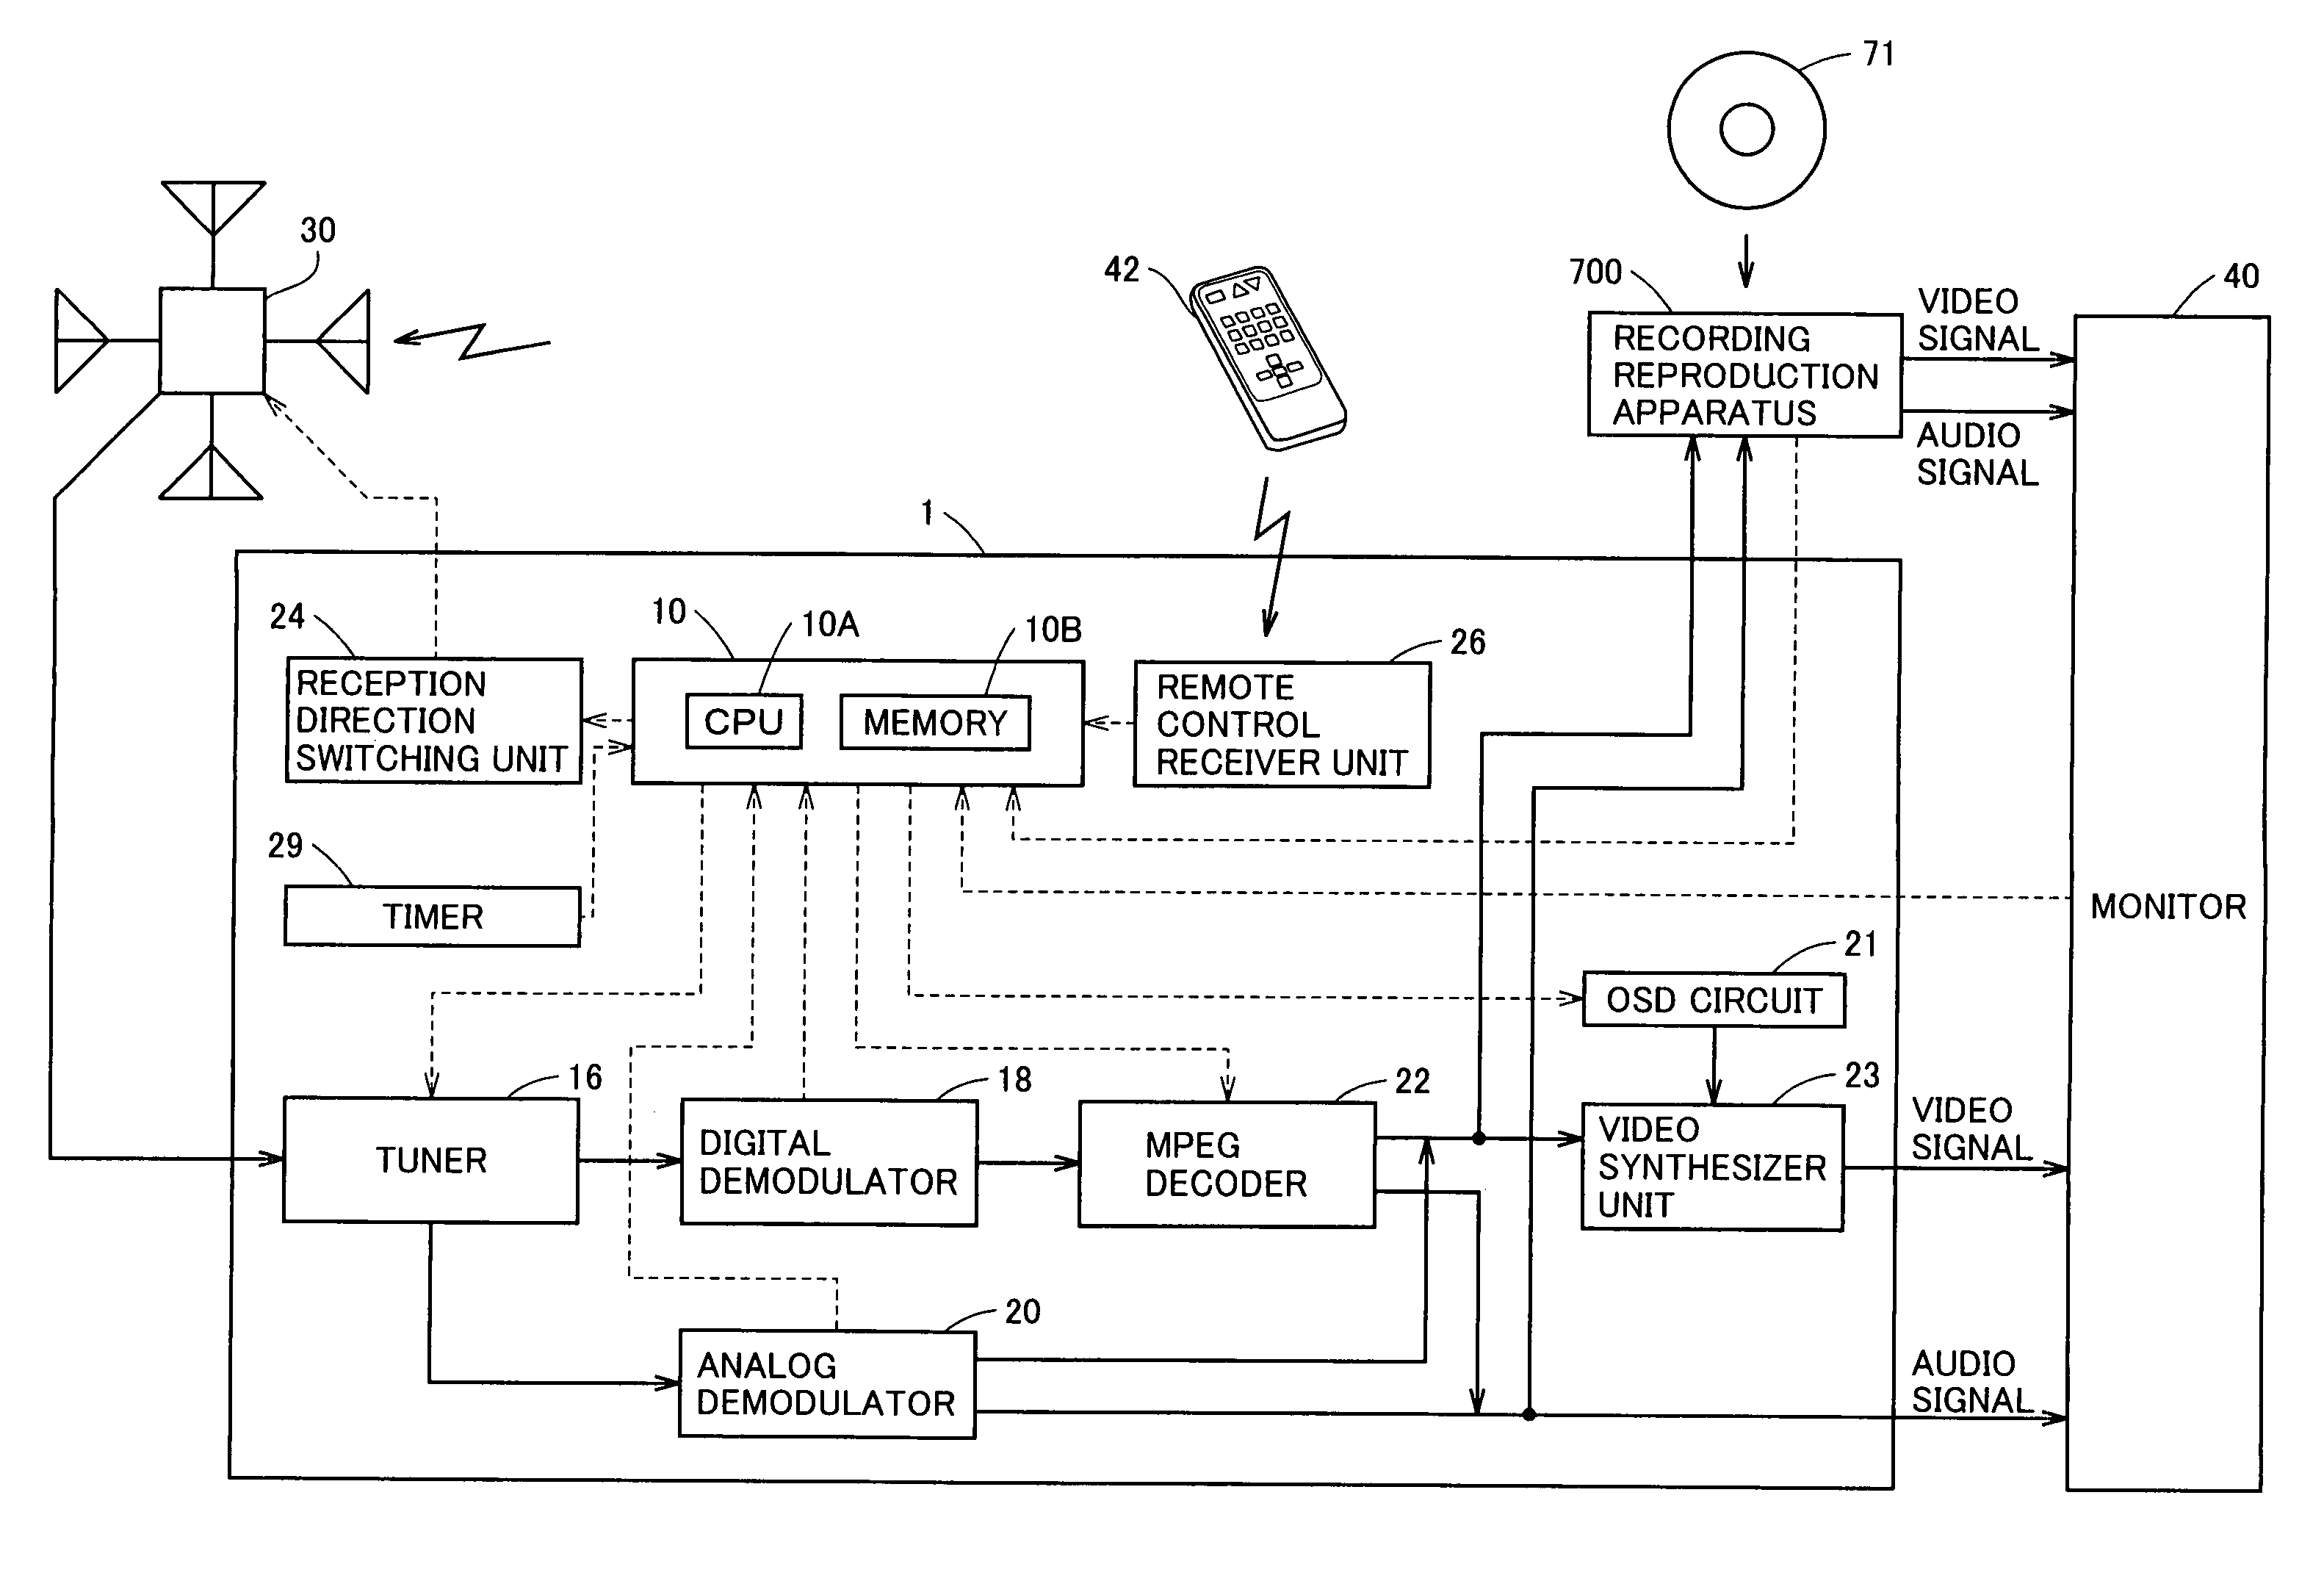 Broadcast receiver receiving broadcasts utilizing variable directional antenna